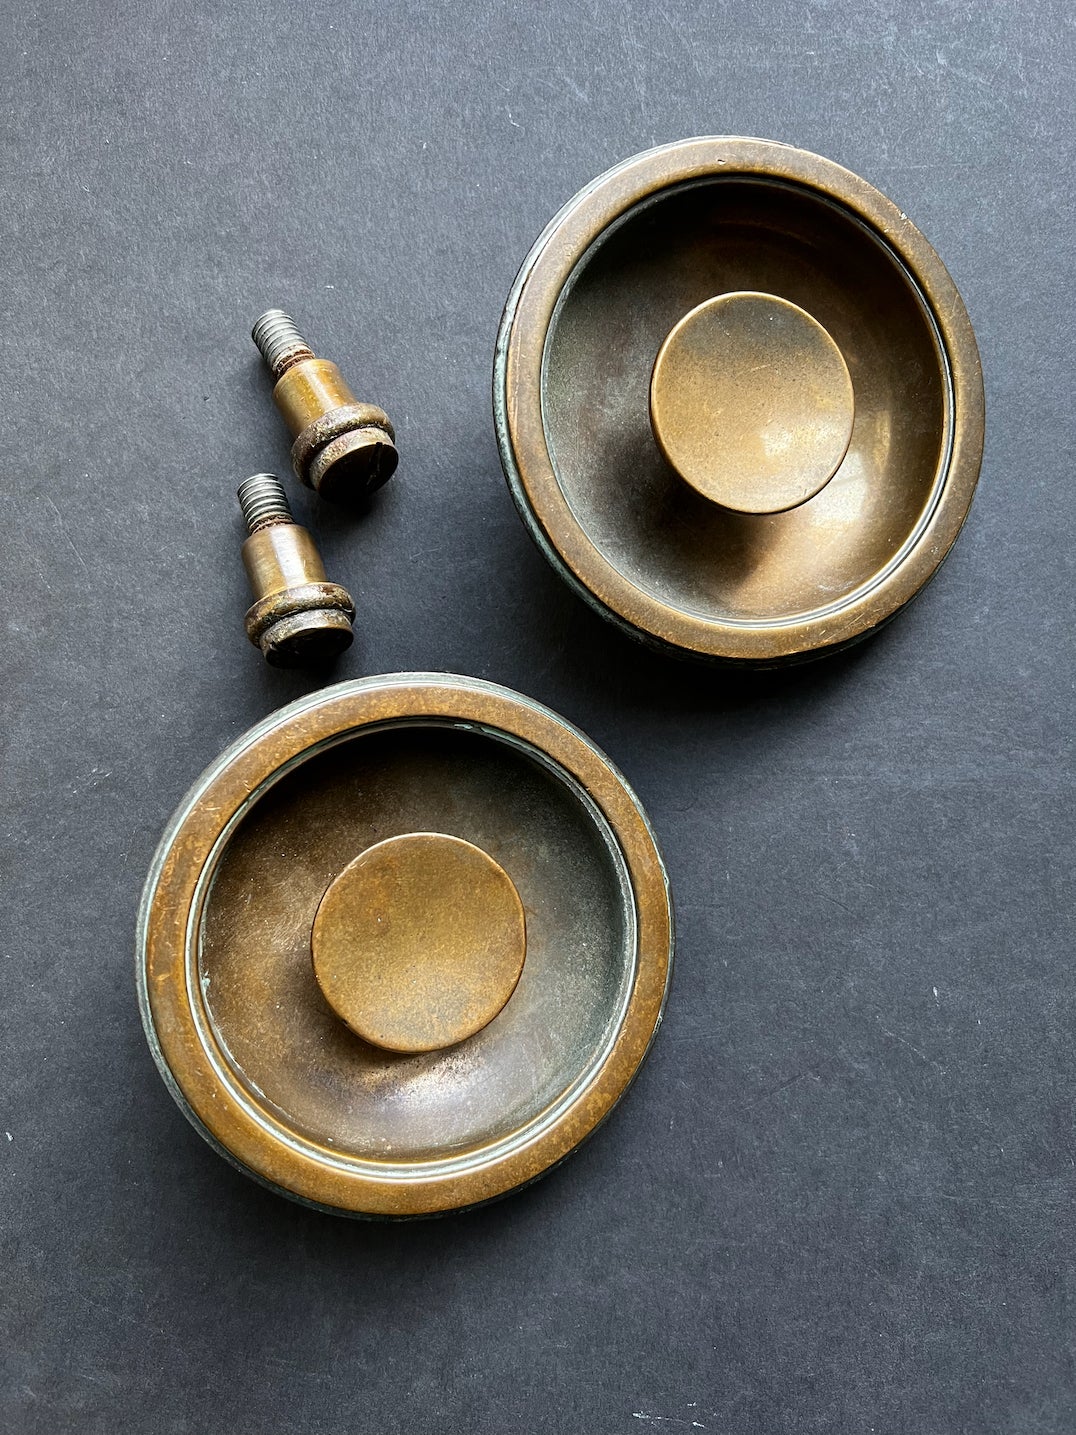 A pair of circular bronze inset handles with nice aged patina. 20th century, found in England.

The handles each comprise two parts - and outer dish with an inner knob - all held in place by a heavy bolt on the reverse side. The outer dish is